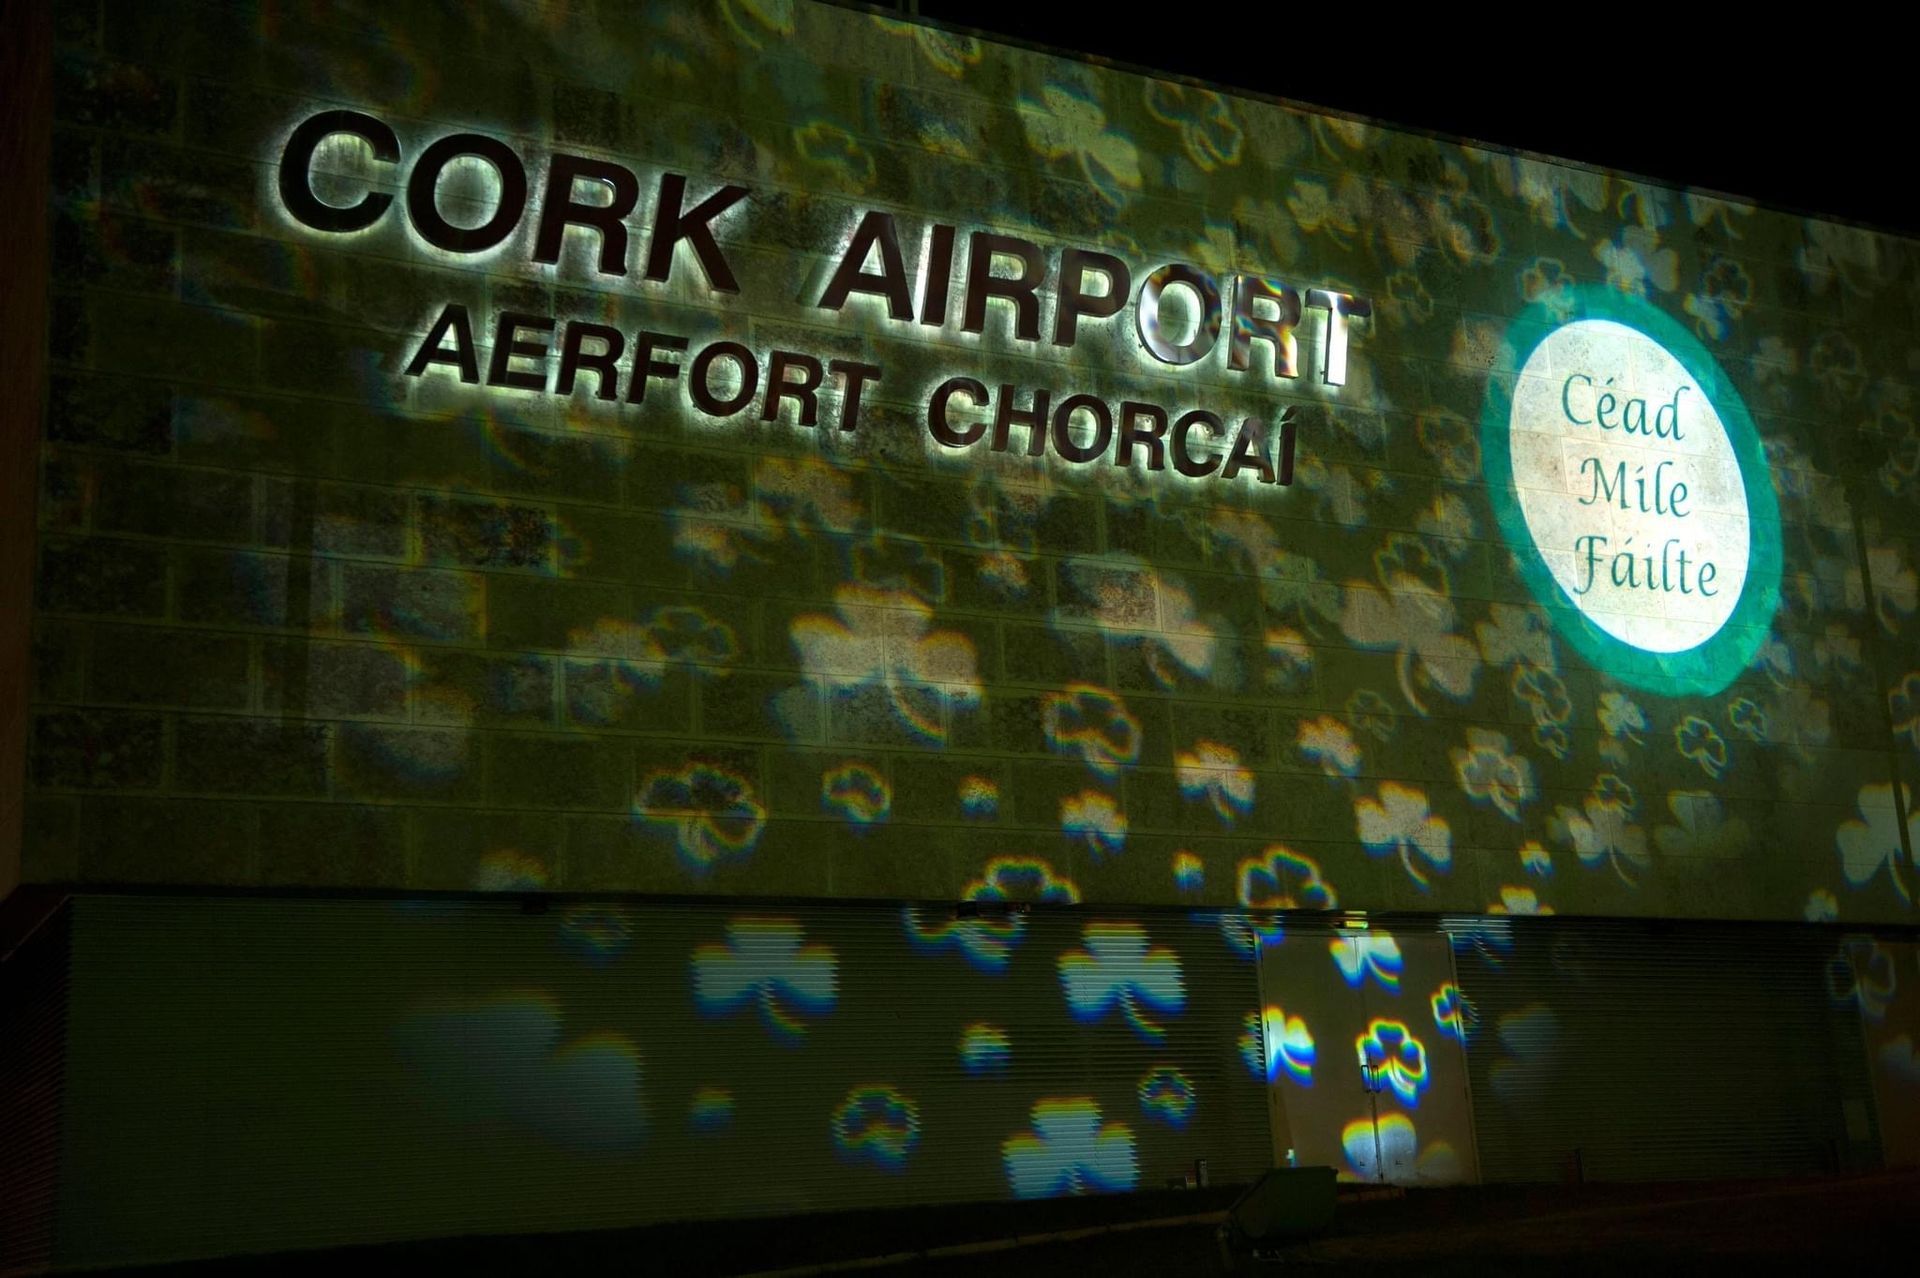 a large sign that says cork airport aerfort chorga on it